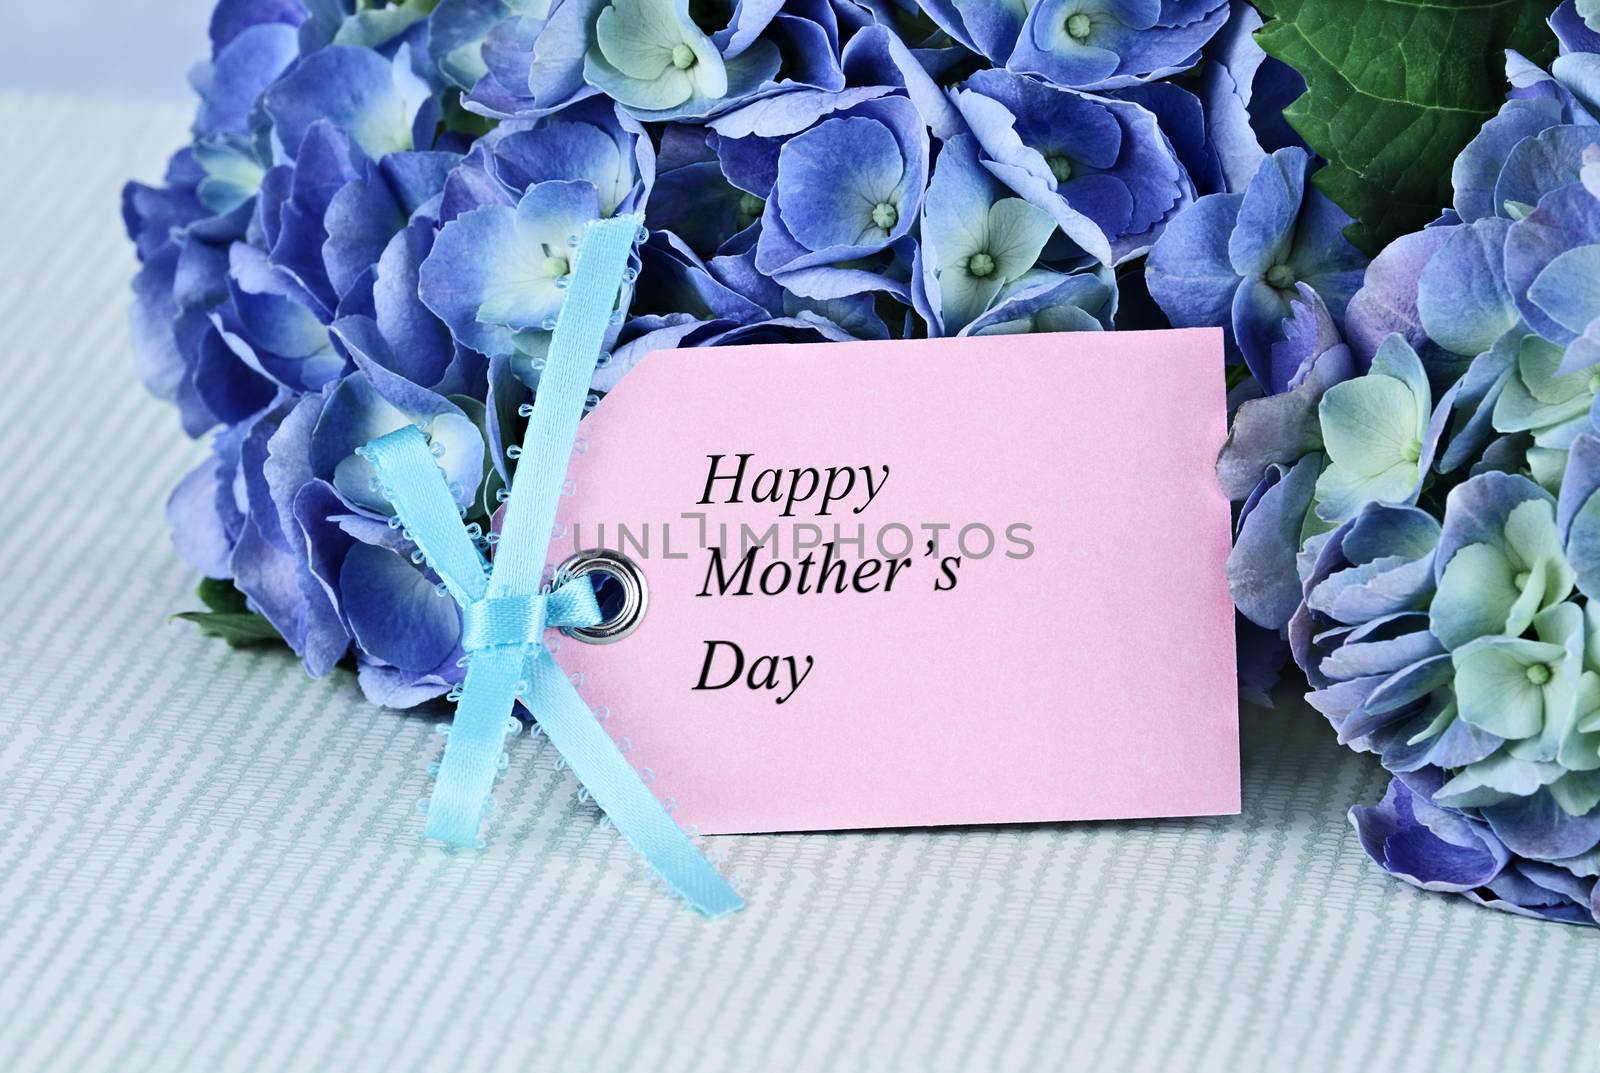 Mothers Day card and flowers over with beautiful hydrangeas and room for your text. Shallow depth of field.